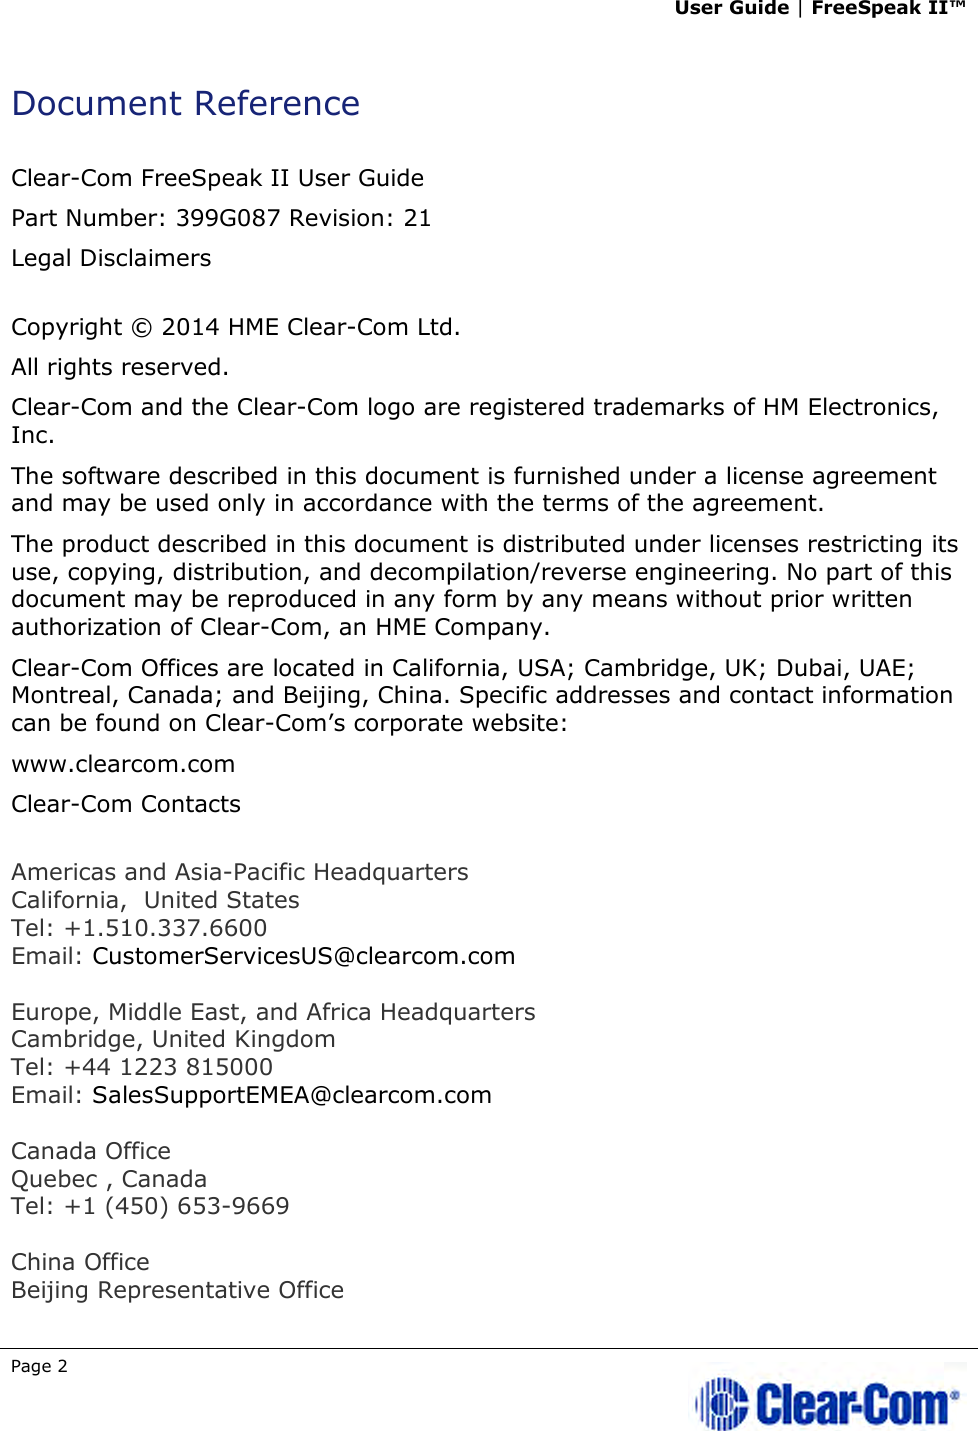 User Guide | FreeSpeak II™  Page 2   Document Reference  Clear-Com FreeSpeak II User Guide  Part Number: 399G087 Revision: 21 Legal Disclaimers  Copyright © 2014 HME Clear-Com Ltd. All rights reserved. Clear-Com and the Clear-Com logo are registered trademarks of HM Electronics, Inc. The software described in this document is furnished under a license agreement and may be used only in accordance with the terms of the agreement.  The product described in this document is distributed under licenses restricting its use, copying, distribution, and decompilation/reverse engineering. No part of this document may be reproduced in any form by any means without prior written authorization of Clear-Com, an HME Company. Clear-Com Offices are located in California, USA; Cambridge, UK; Dubai, UAE; Montreal, Canada; and Beijing, China. Specific addresses and contact information can be found on Clear-Com’s corporate website: www.clearcom.com Clear-Com Contacts  Americas and Asia-Pacific Headquarters California,  United States Tel: +1.510.337.6600 Email: CustomerServicesUS@clearcom.com  Europe, Middle East, and Africa Headquarters Cambridge, United Kingdom Tel: +44 1223 815000 Email: SalesSupportEMEA@clearcom.com  Canada Office Quebec , Canada Tel: +1 (450) 653-9669  China Office Beijing Representative Office 